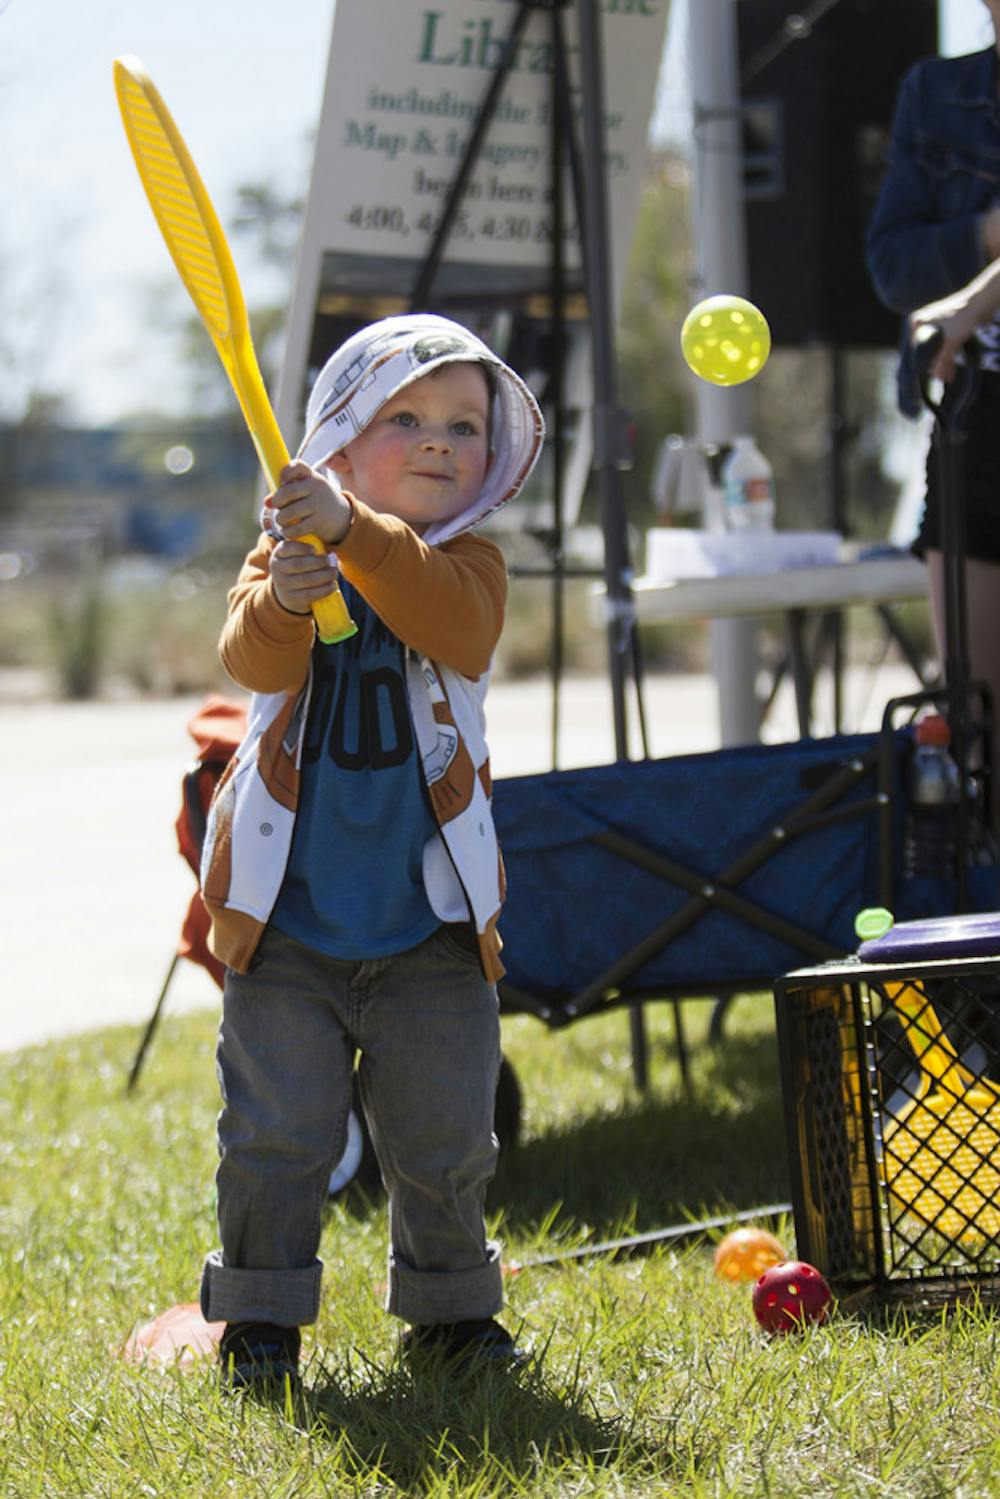 <p dir="ltr"><span>Killian Pennell, 3, plays with a Wiffle ball at the YMCA booth during Active Streets Gainesville at Depot Park on Sunday. Killian's dad, Kyle Pennell, said this is Killian's second time coming to Active Streets Gainesville.</span></p><p><span> </span></p>